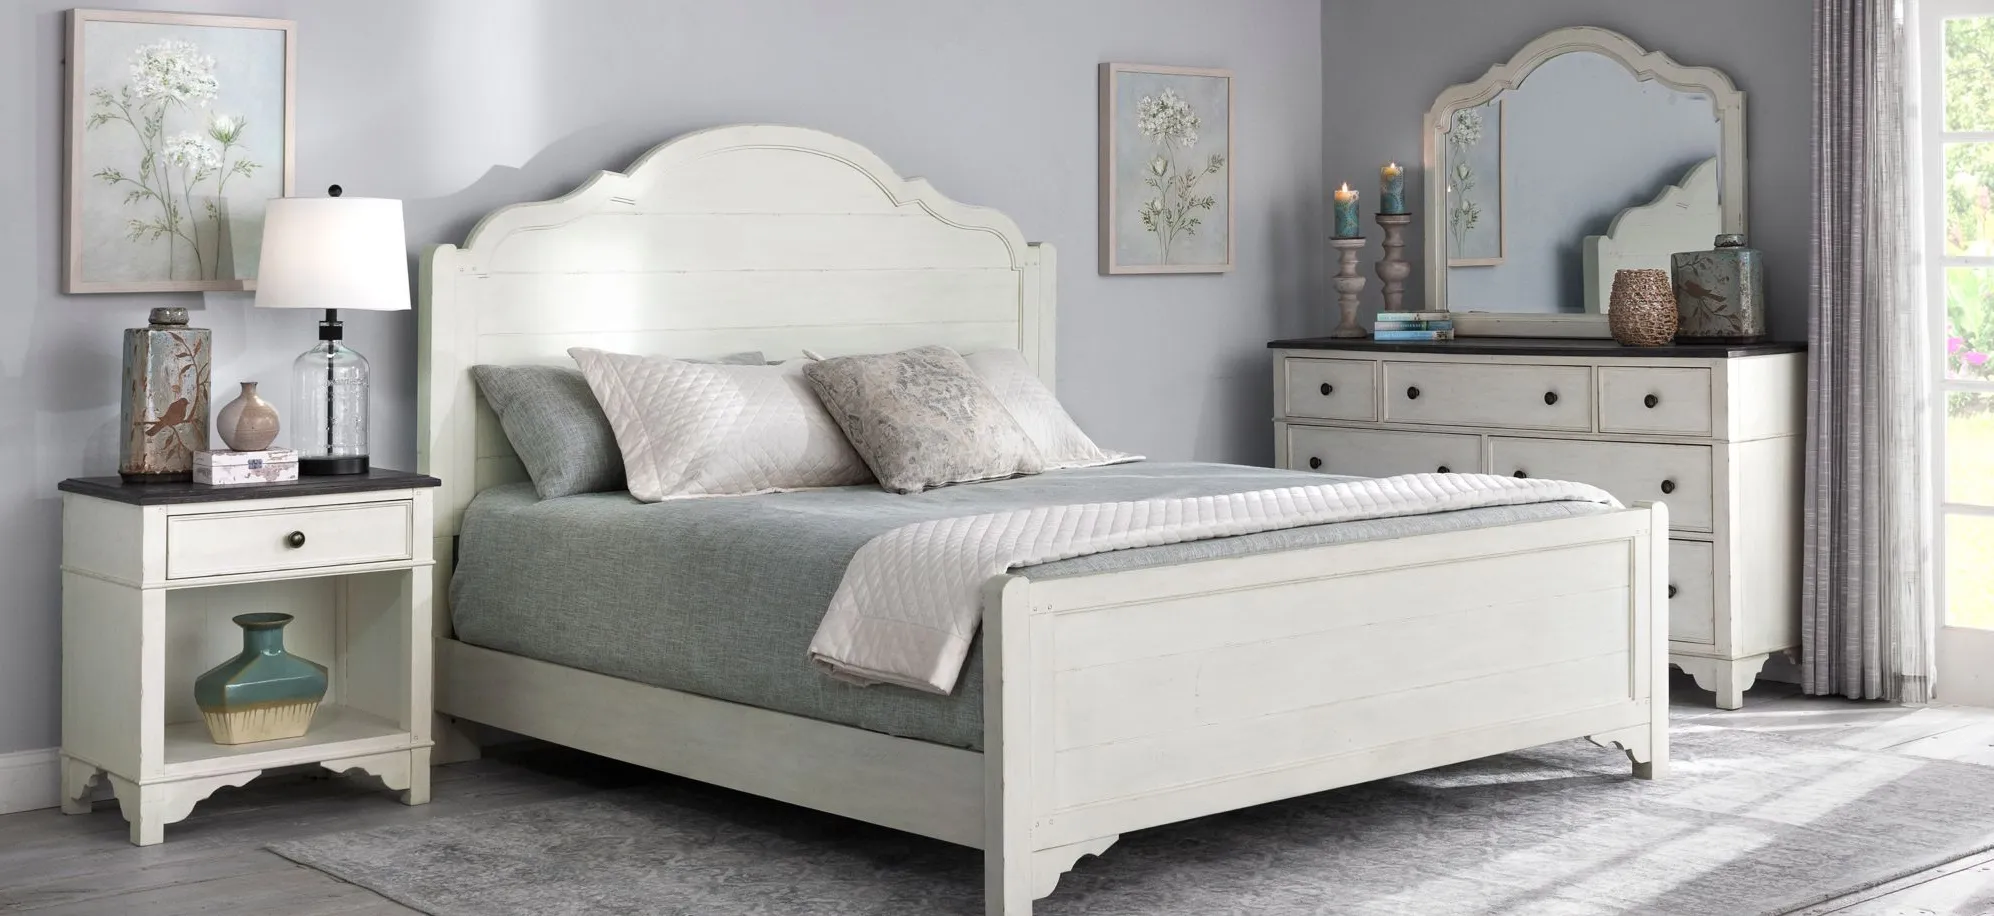 Colette 4-pc. Bedroom Set in Feathered White / Rich Charcoal by Riverside Furniture